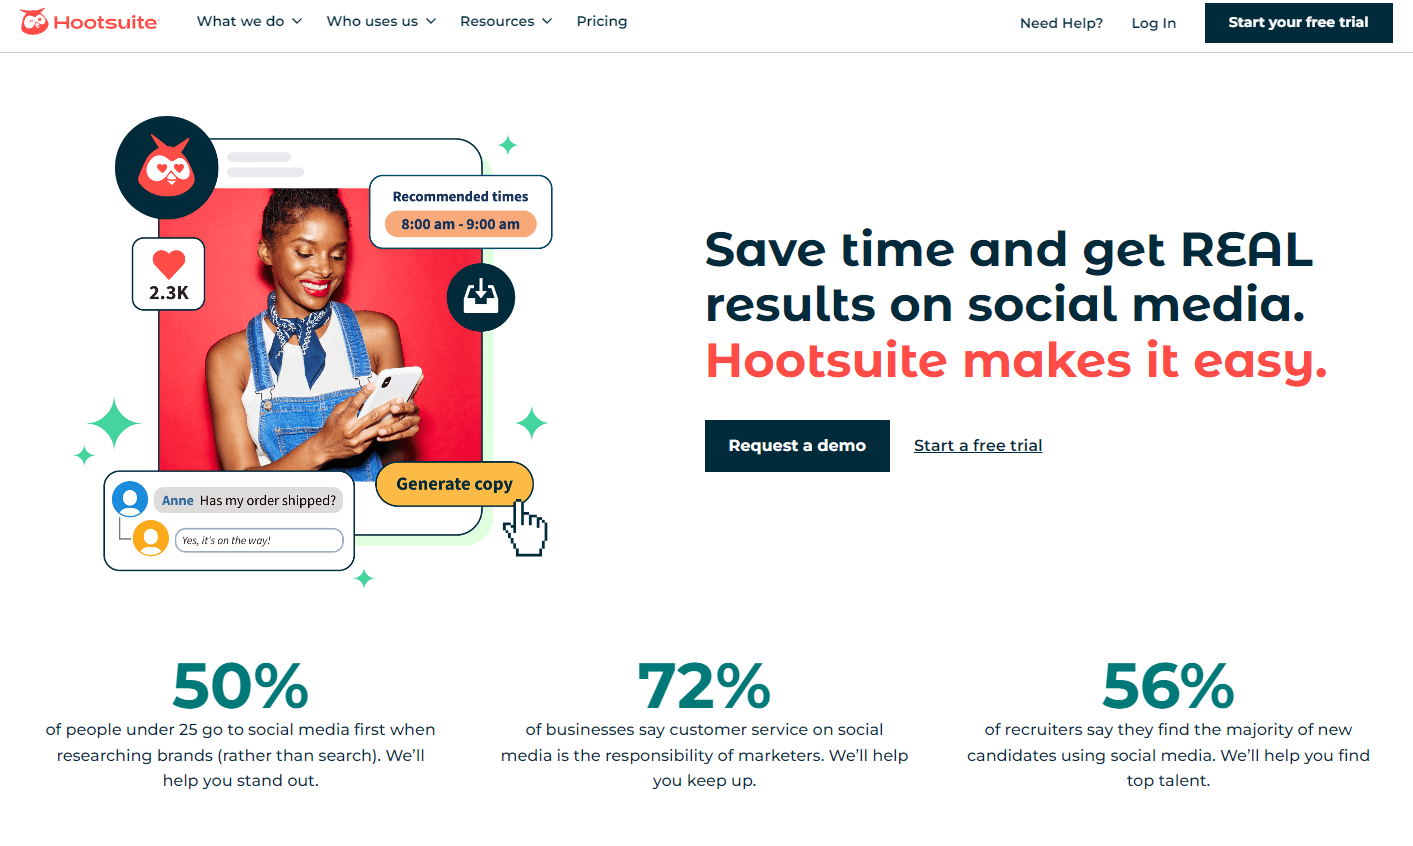 Hootsuide homepage showing the image of a social media post with recommended posting times, number of reactions, as well as download and generate copy buttons.